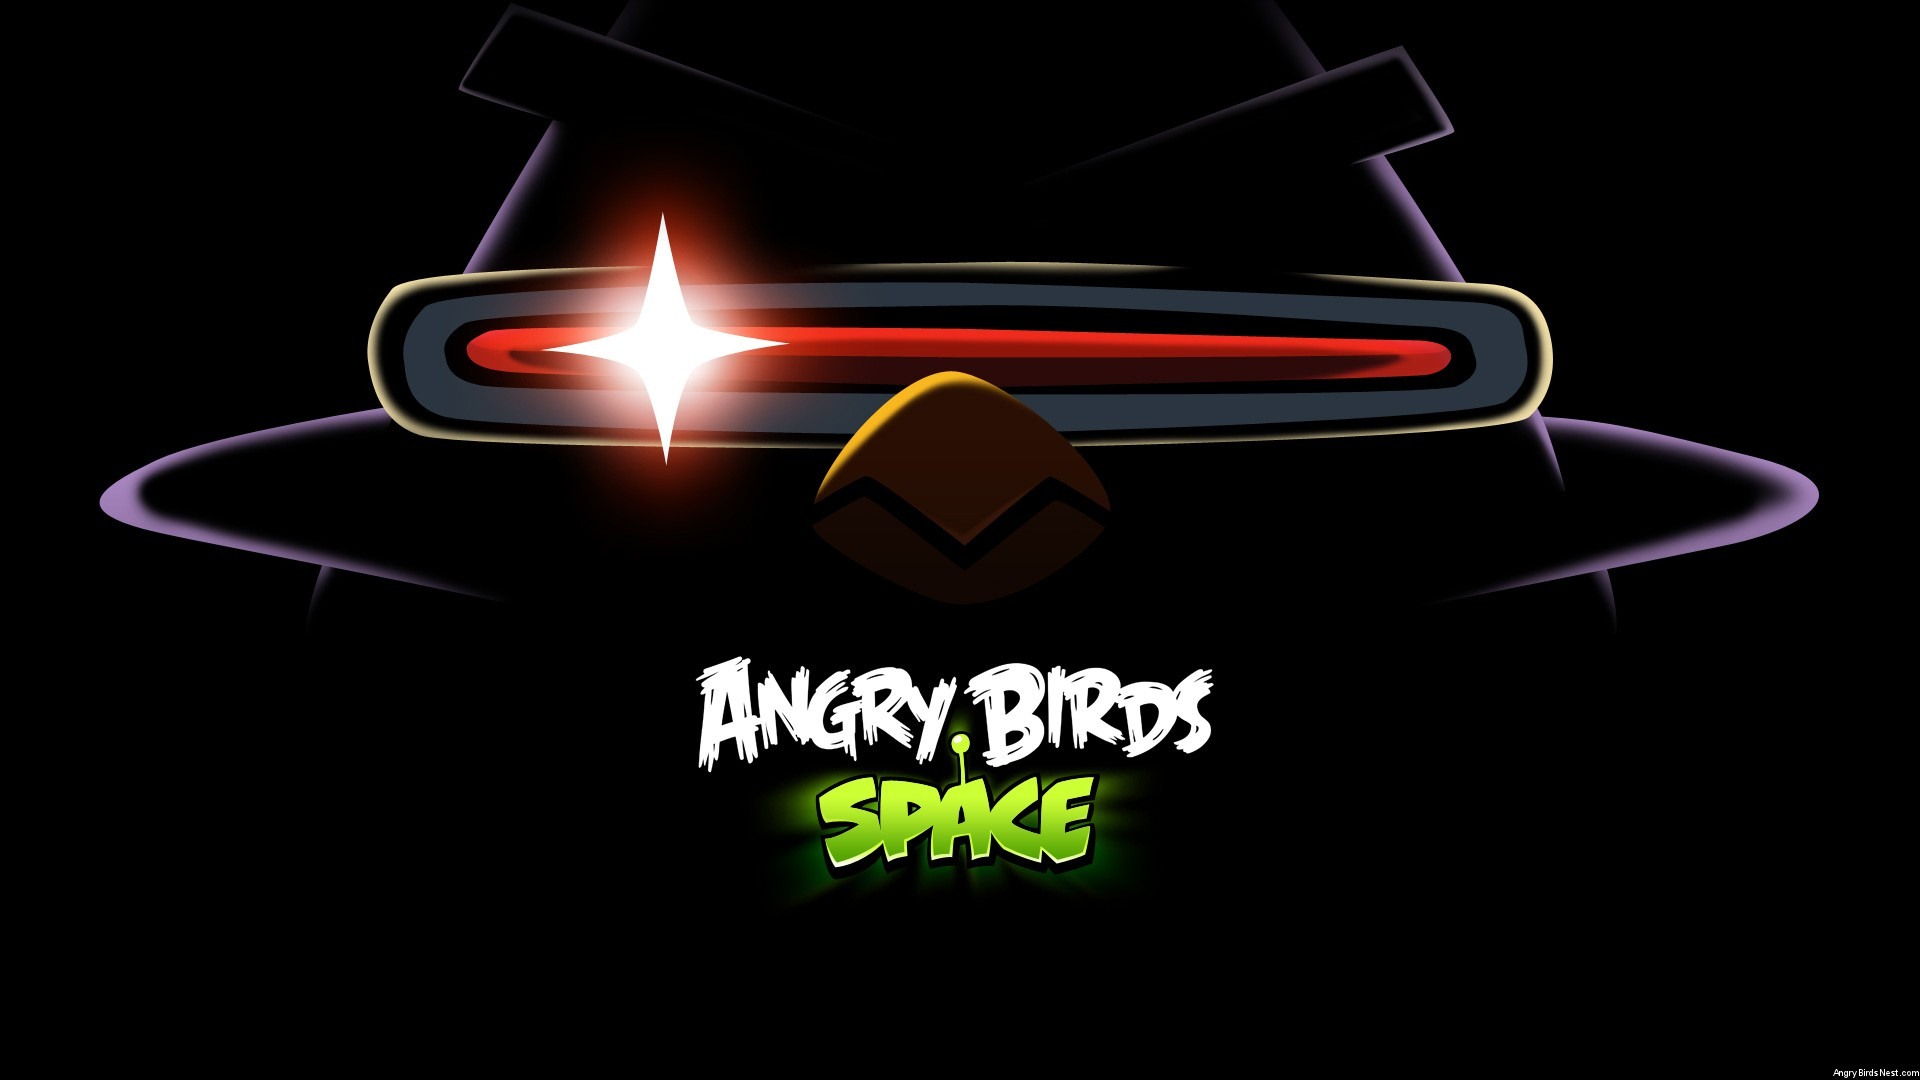 Angry Birds game wallpapers #22 - 1920x1080